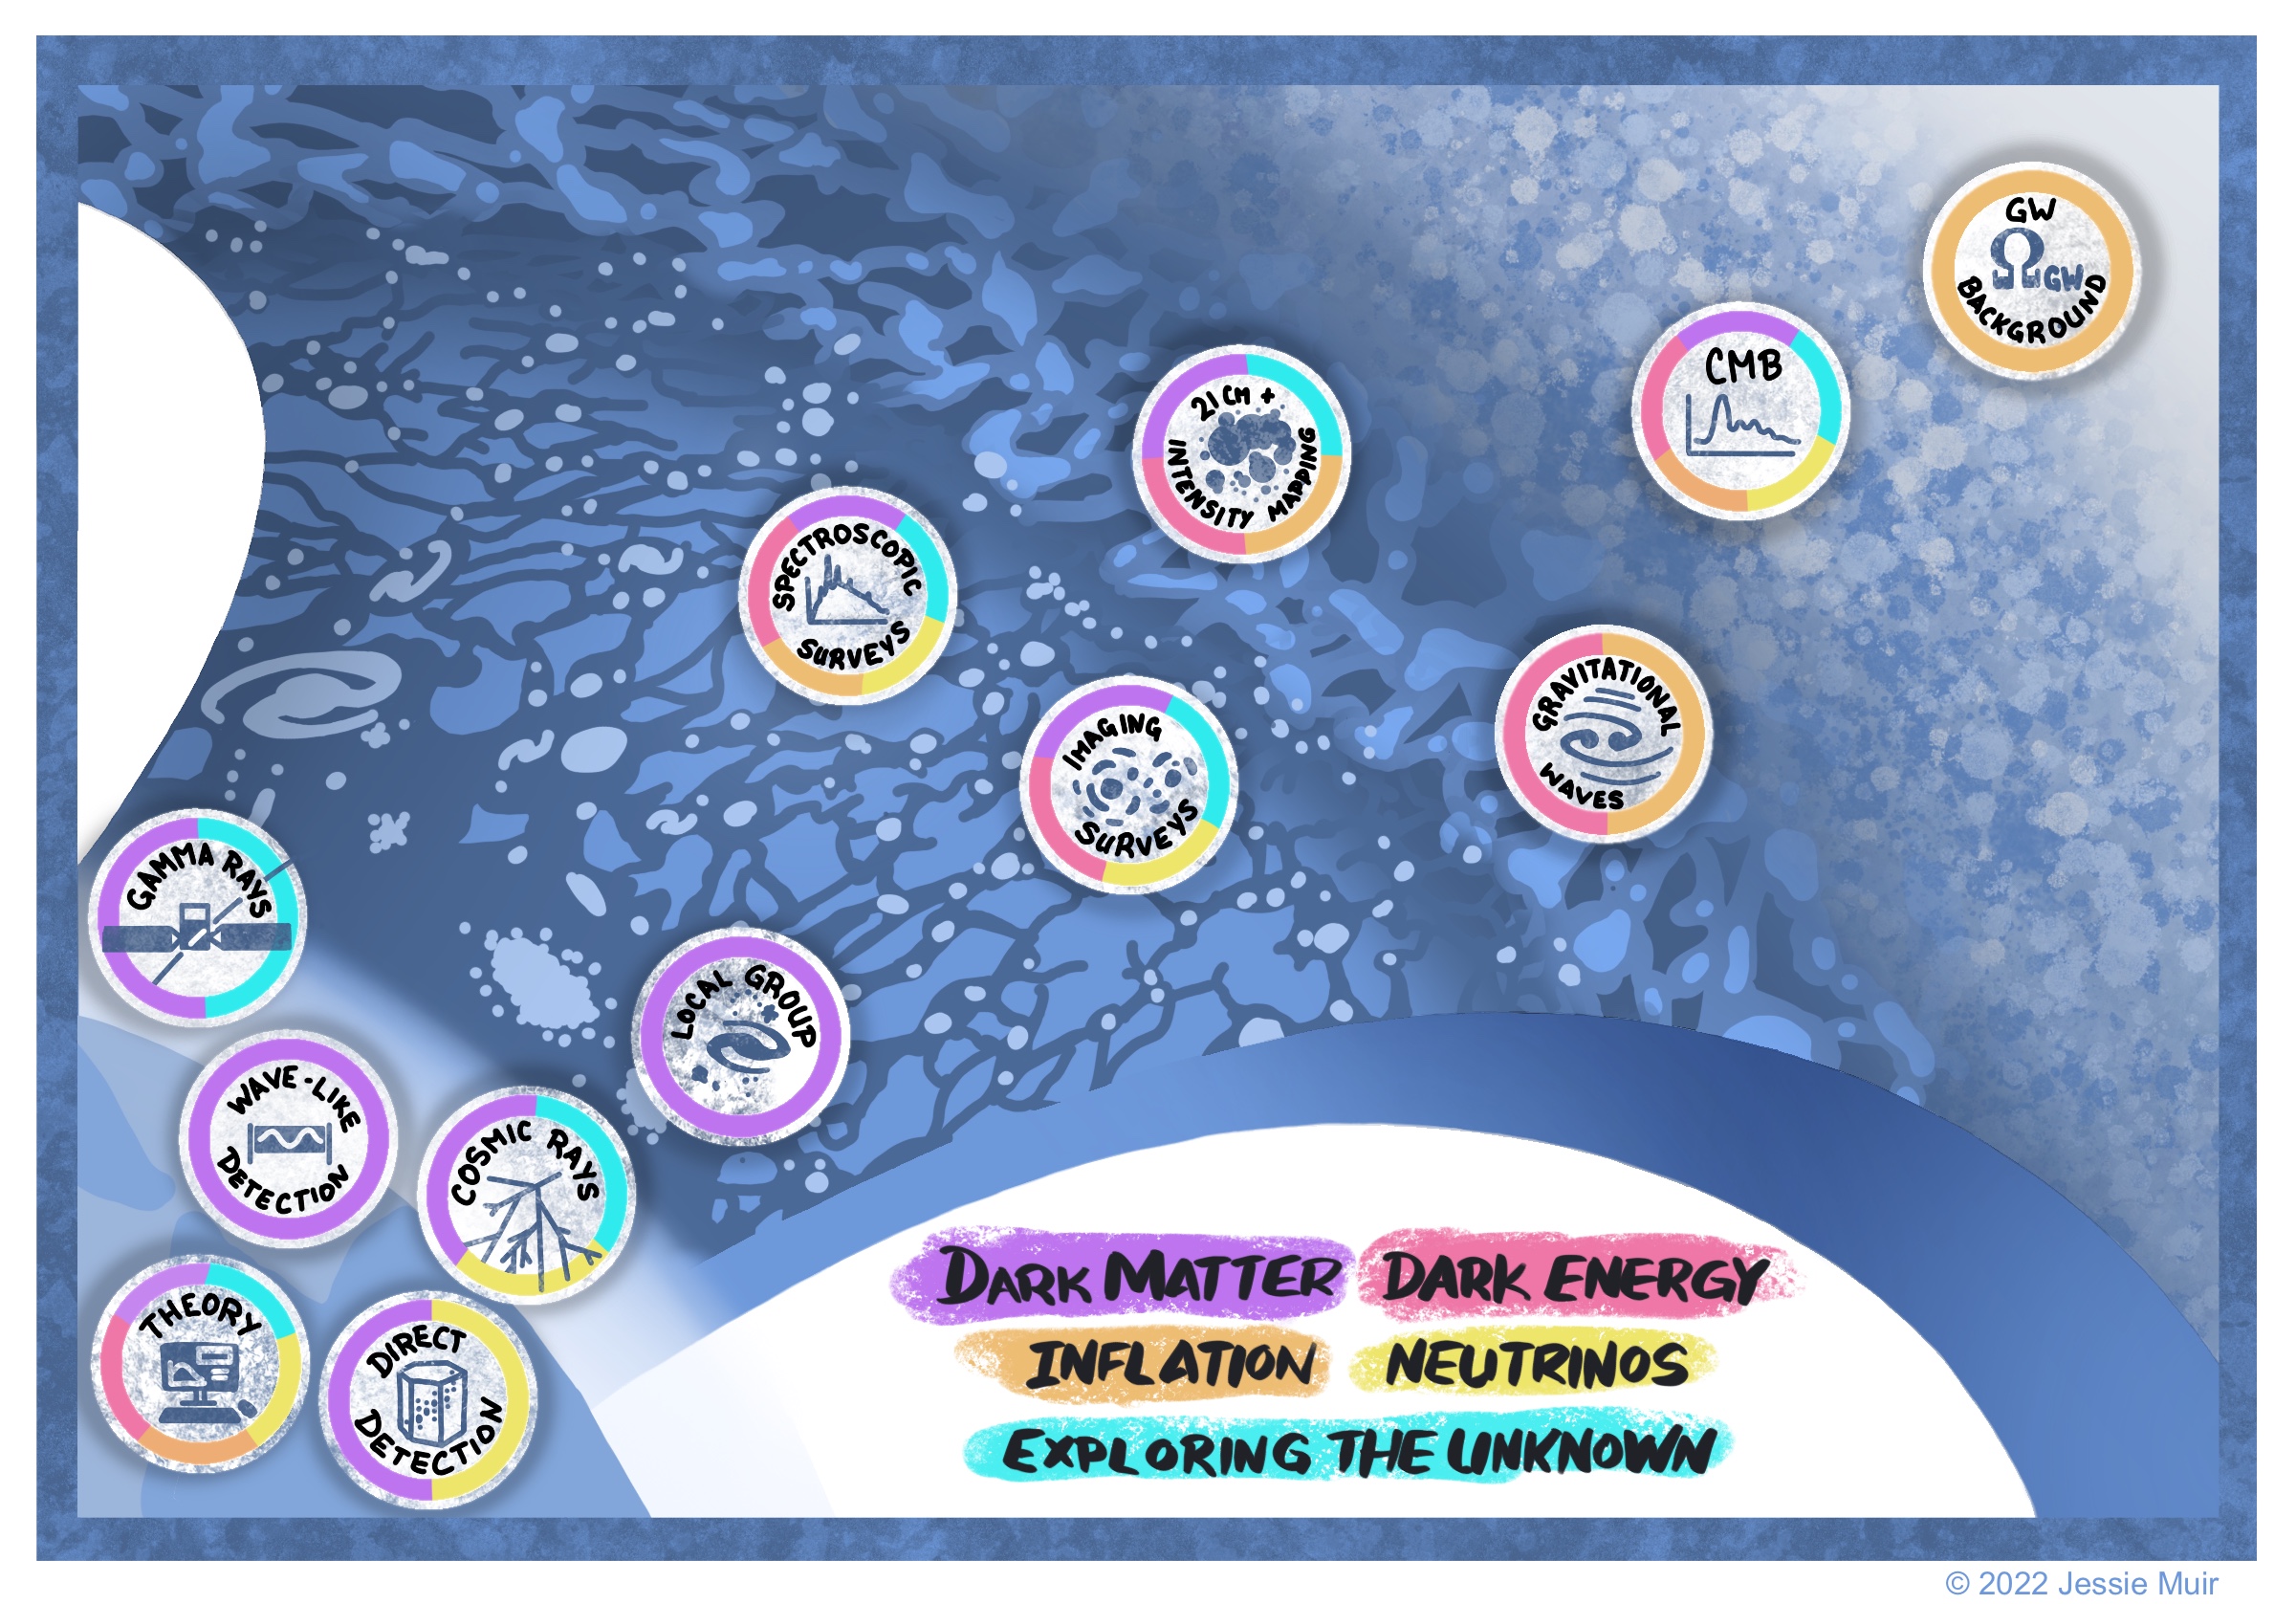 alt="Cartoon with Earth in the lower left of the image, with a fan-shaped illustration showing different cosmological epochs observed as we look out into the Universe, including local group dwarf galaxies, large scle structure, reionization, and the CMB. A legend associates the snowmass cosmic frontier science goals of dark matter, dark energy, inflation, neutrinos, and exploring the unknown with different colors. Icons identifying different kinds of observables highlight what kinds of astrophysical, lab, and cosmic probes will inform these science cases."